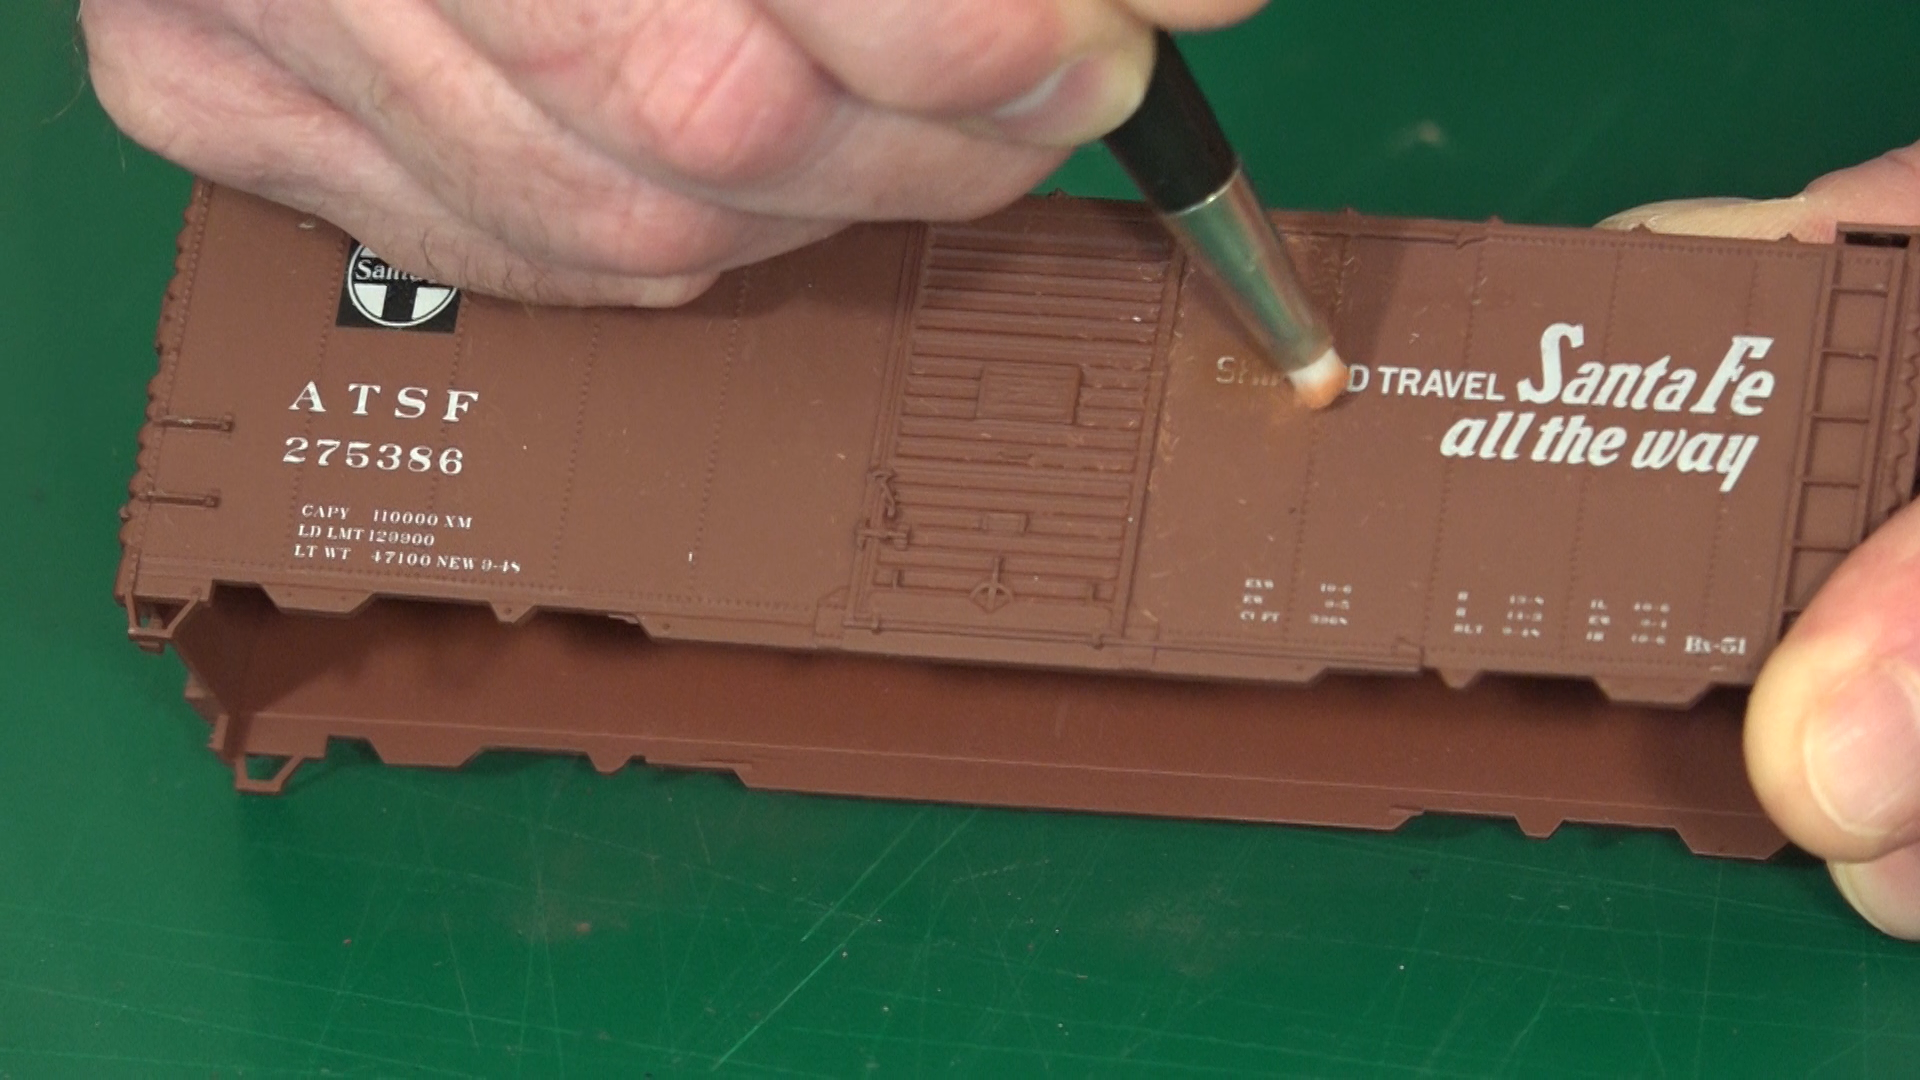 Model Railroading Tips: Weathering with a Scratch Brush product featured image thumbnail.